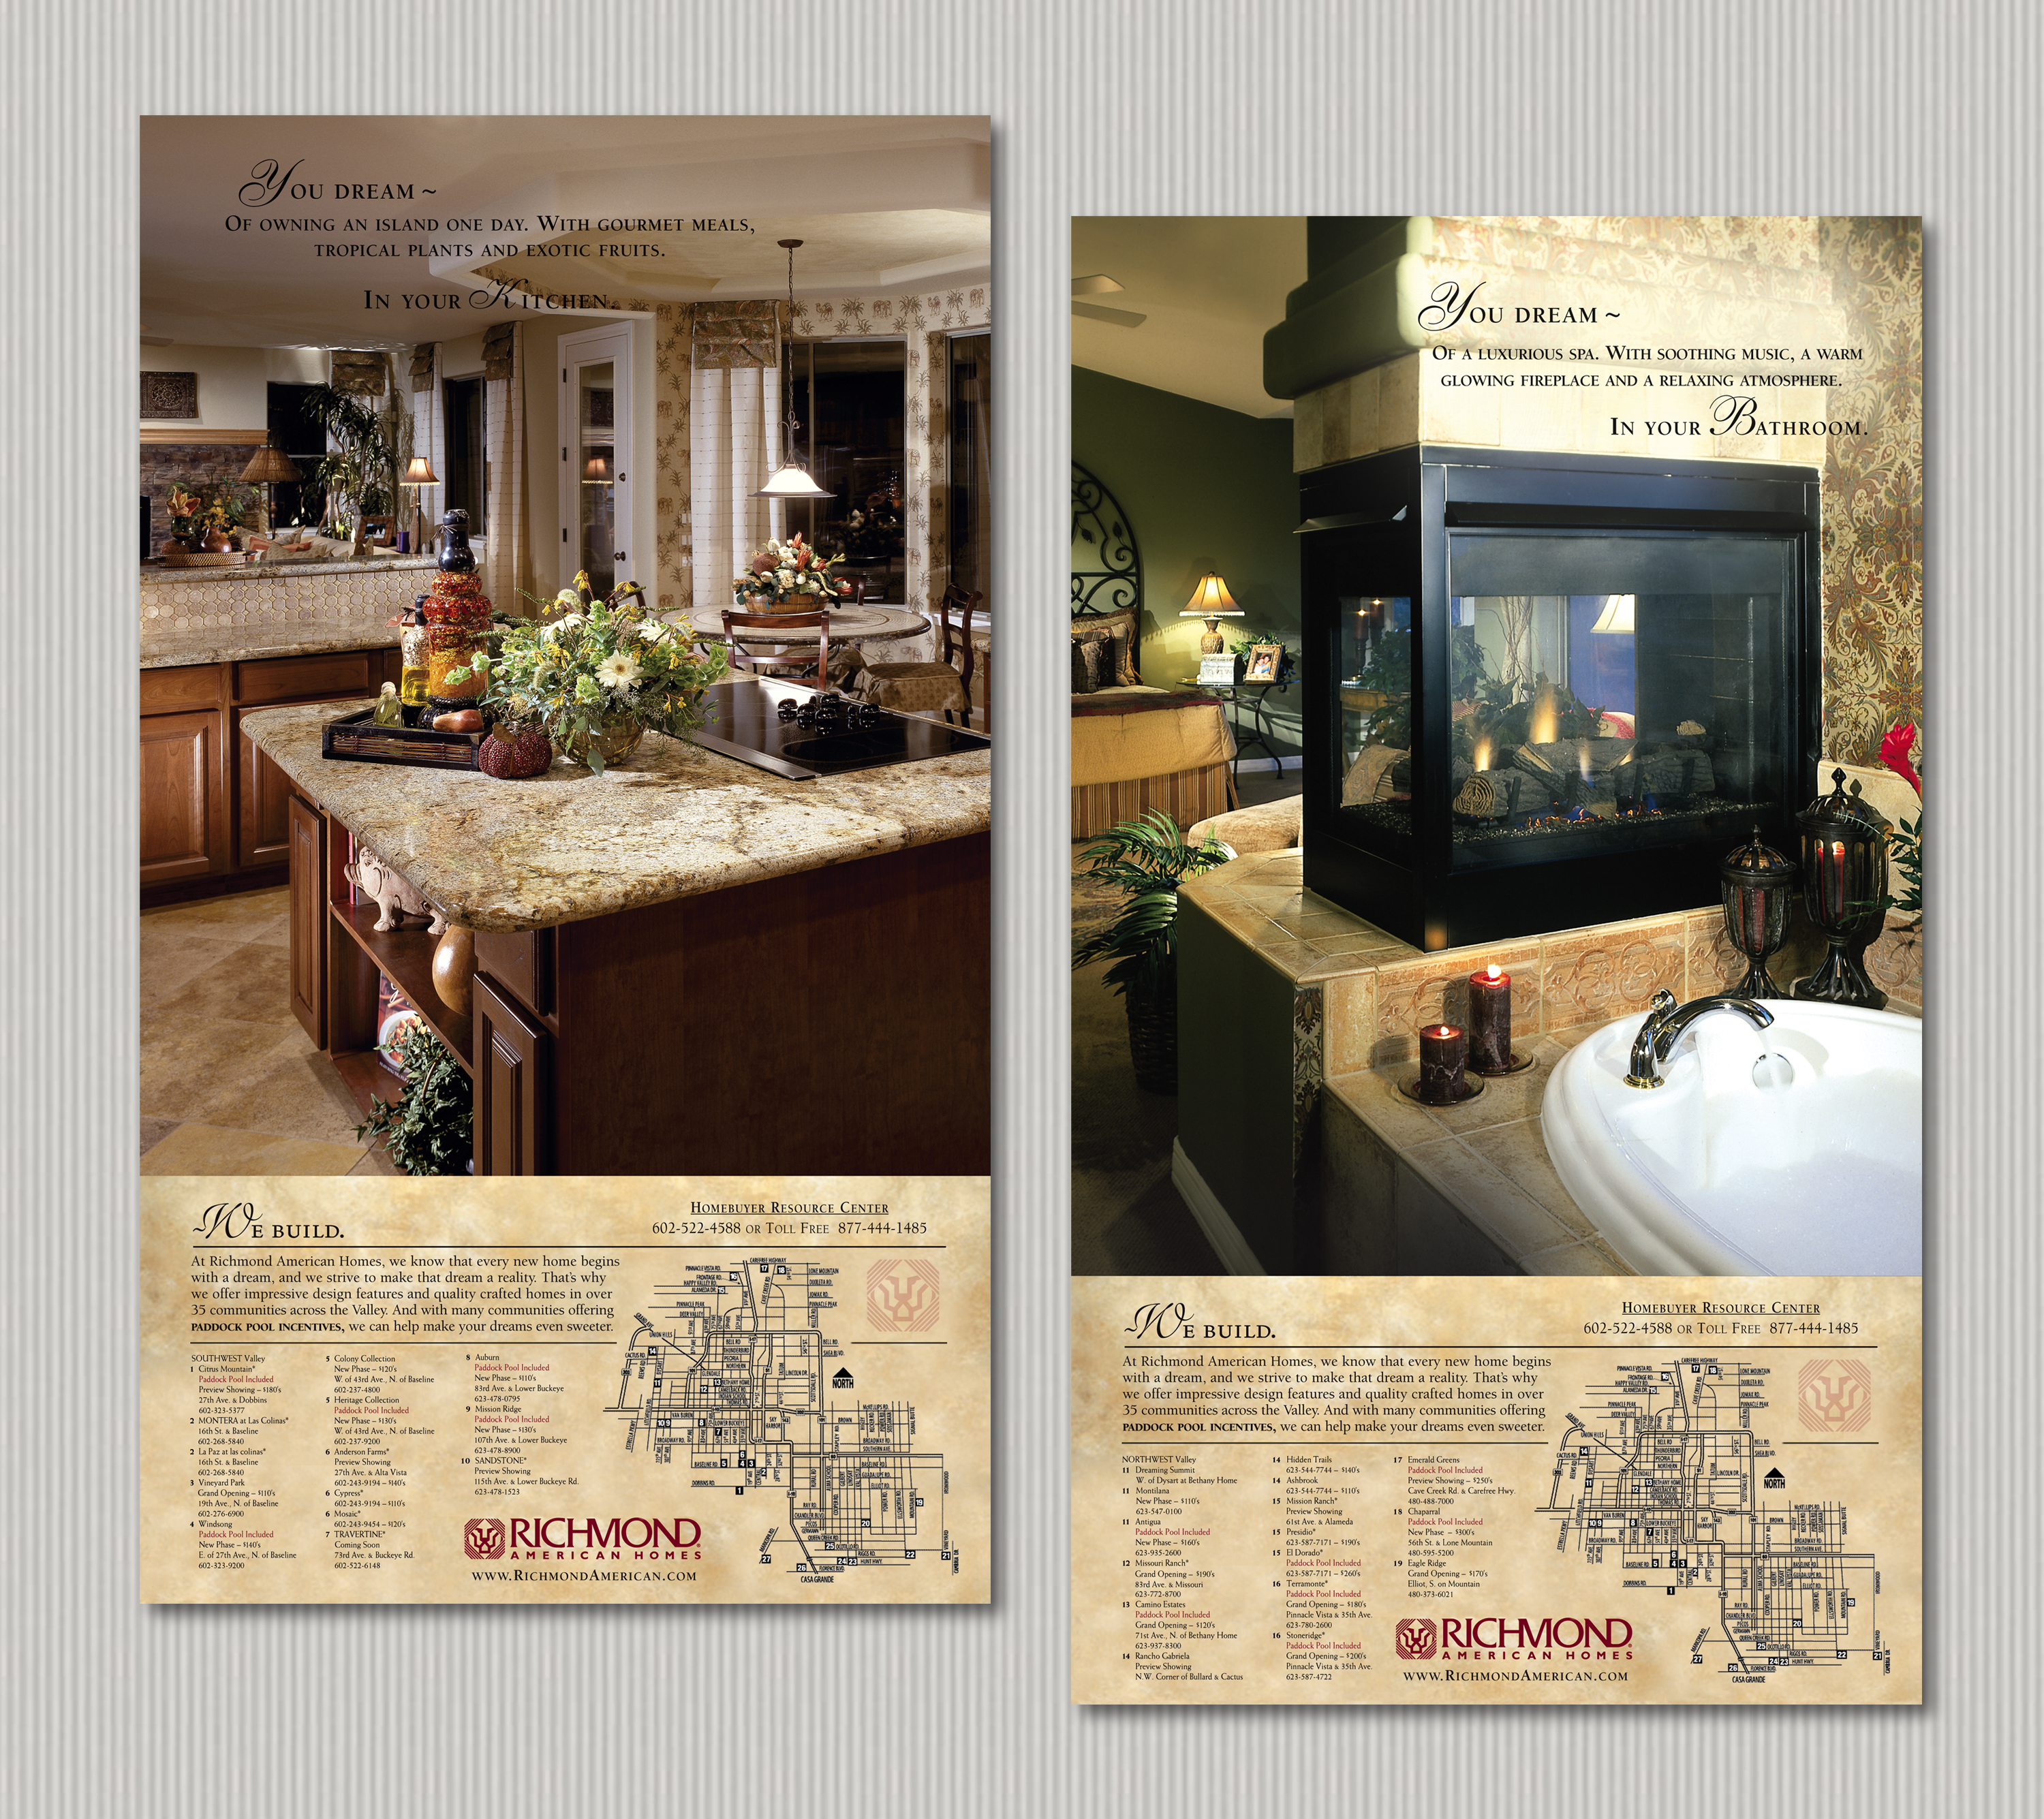 Print campaign, ad #3 for Mosaic at Anderson Farm